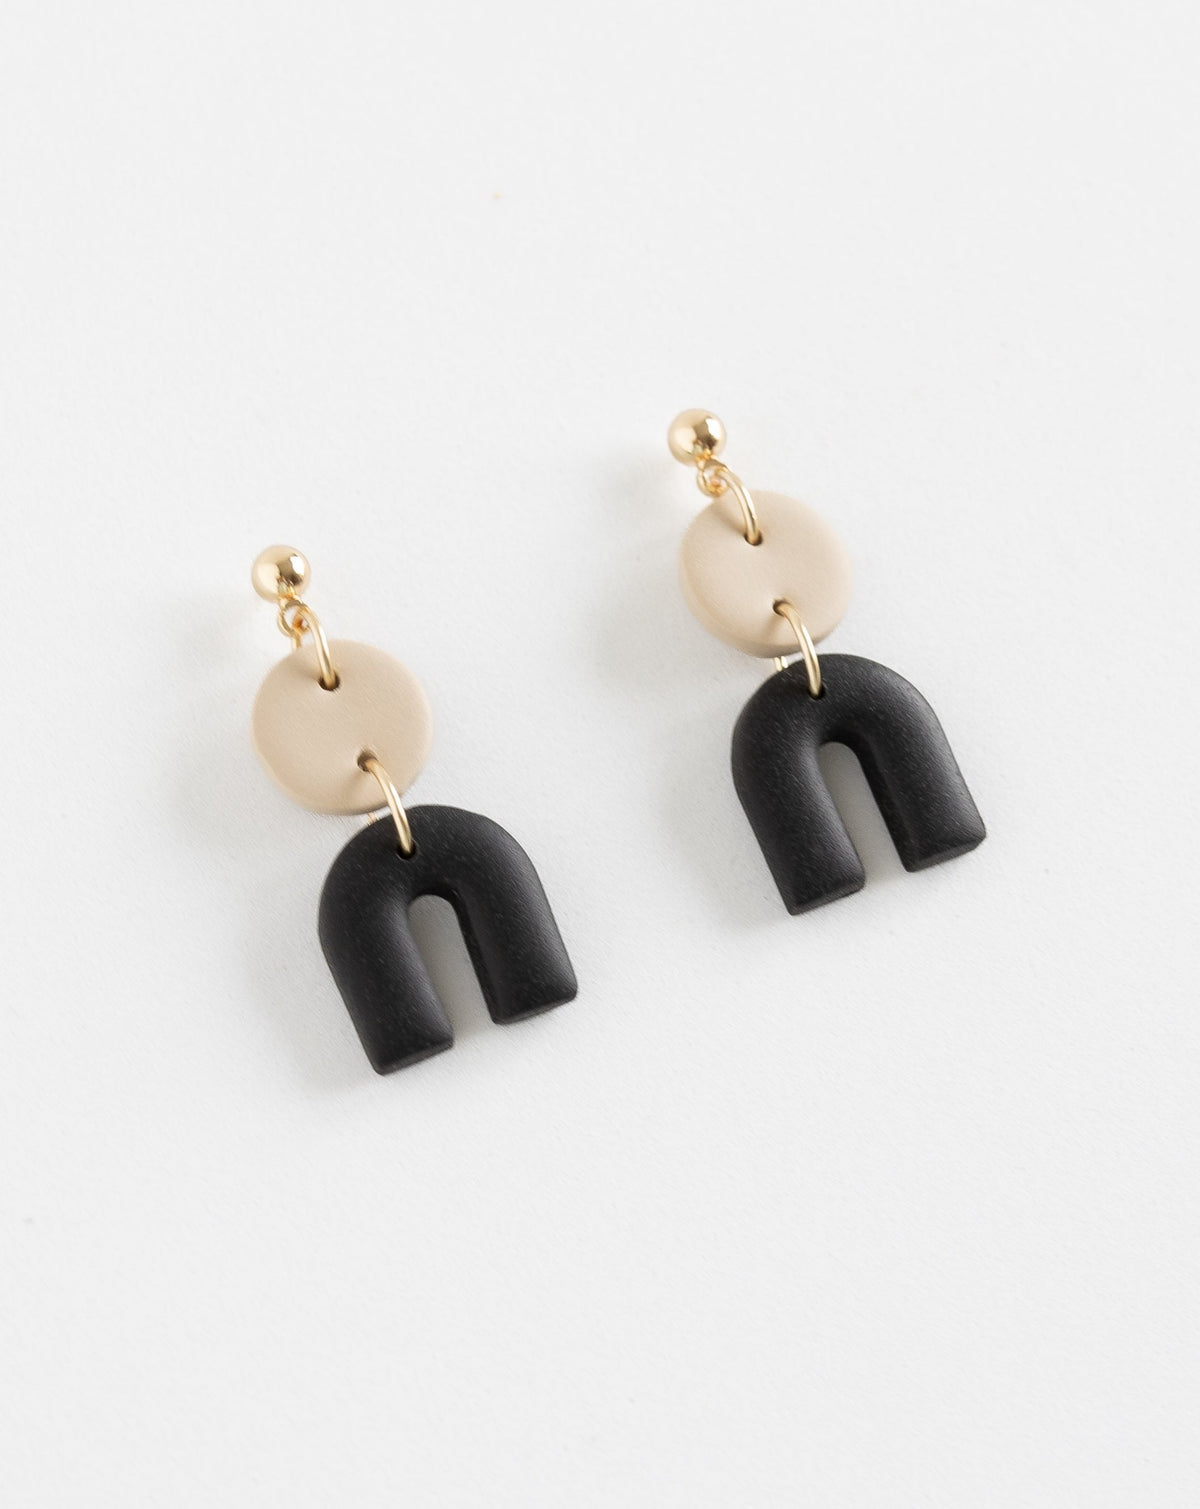 Tiny Arch earrings in two part of Beige and black clay parts with gold plated Ball studs, angled view.